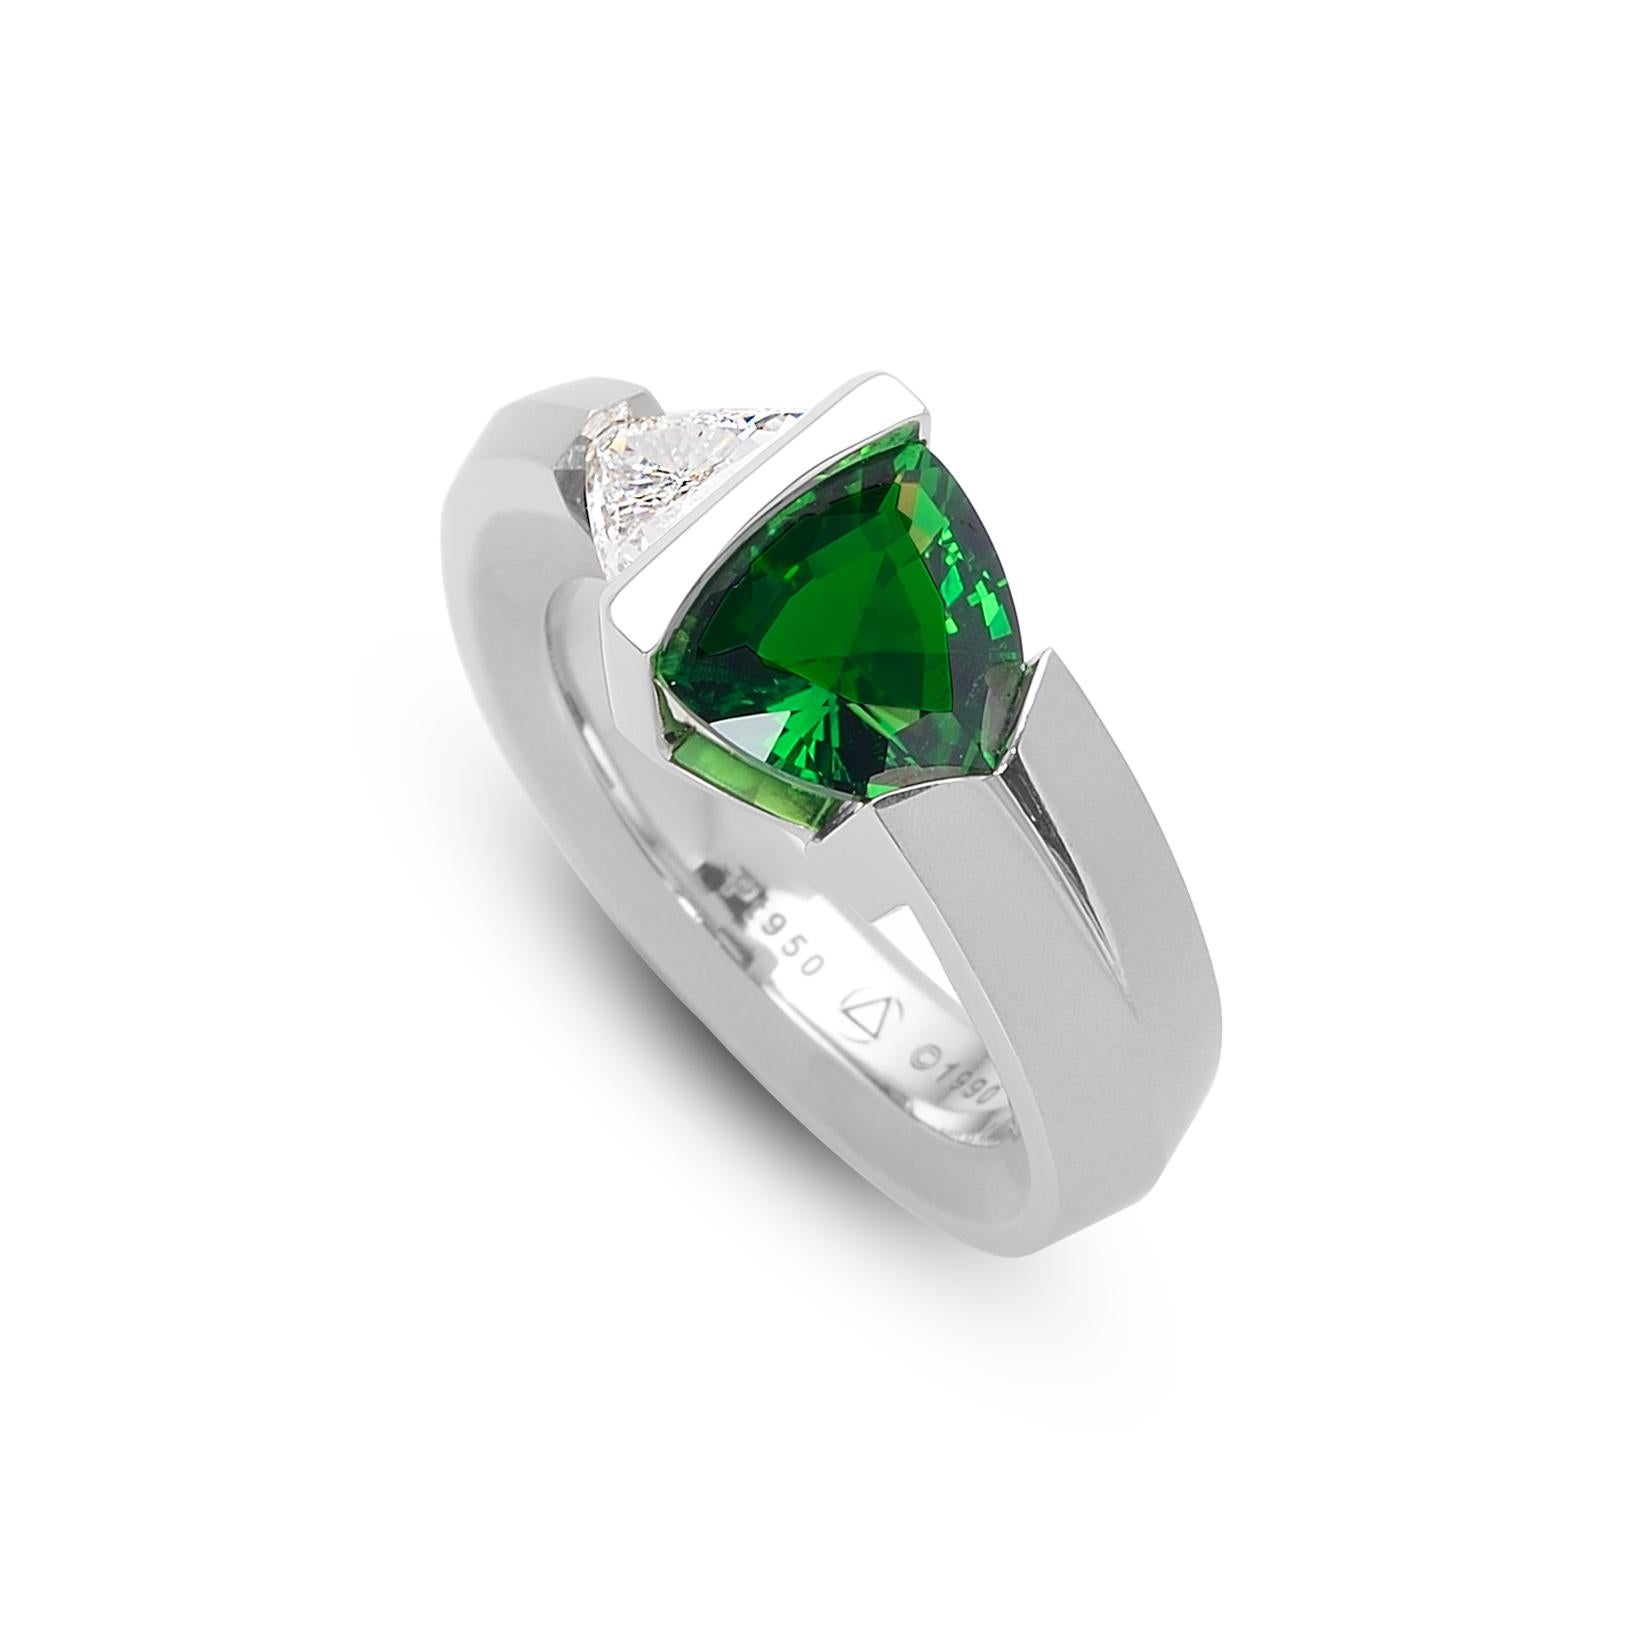 The Steven Kretchmer 2-Stone Rudder ring with a tension-set trillion cut diamond and chrome tourmaline is handcrafted in platinum with a half matte finish. The 0.55 ct. trillion cut diamond is VS with F-G color. The 2.02 ct. trillion cut chrome